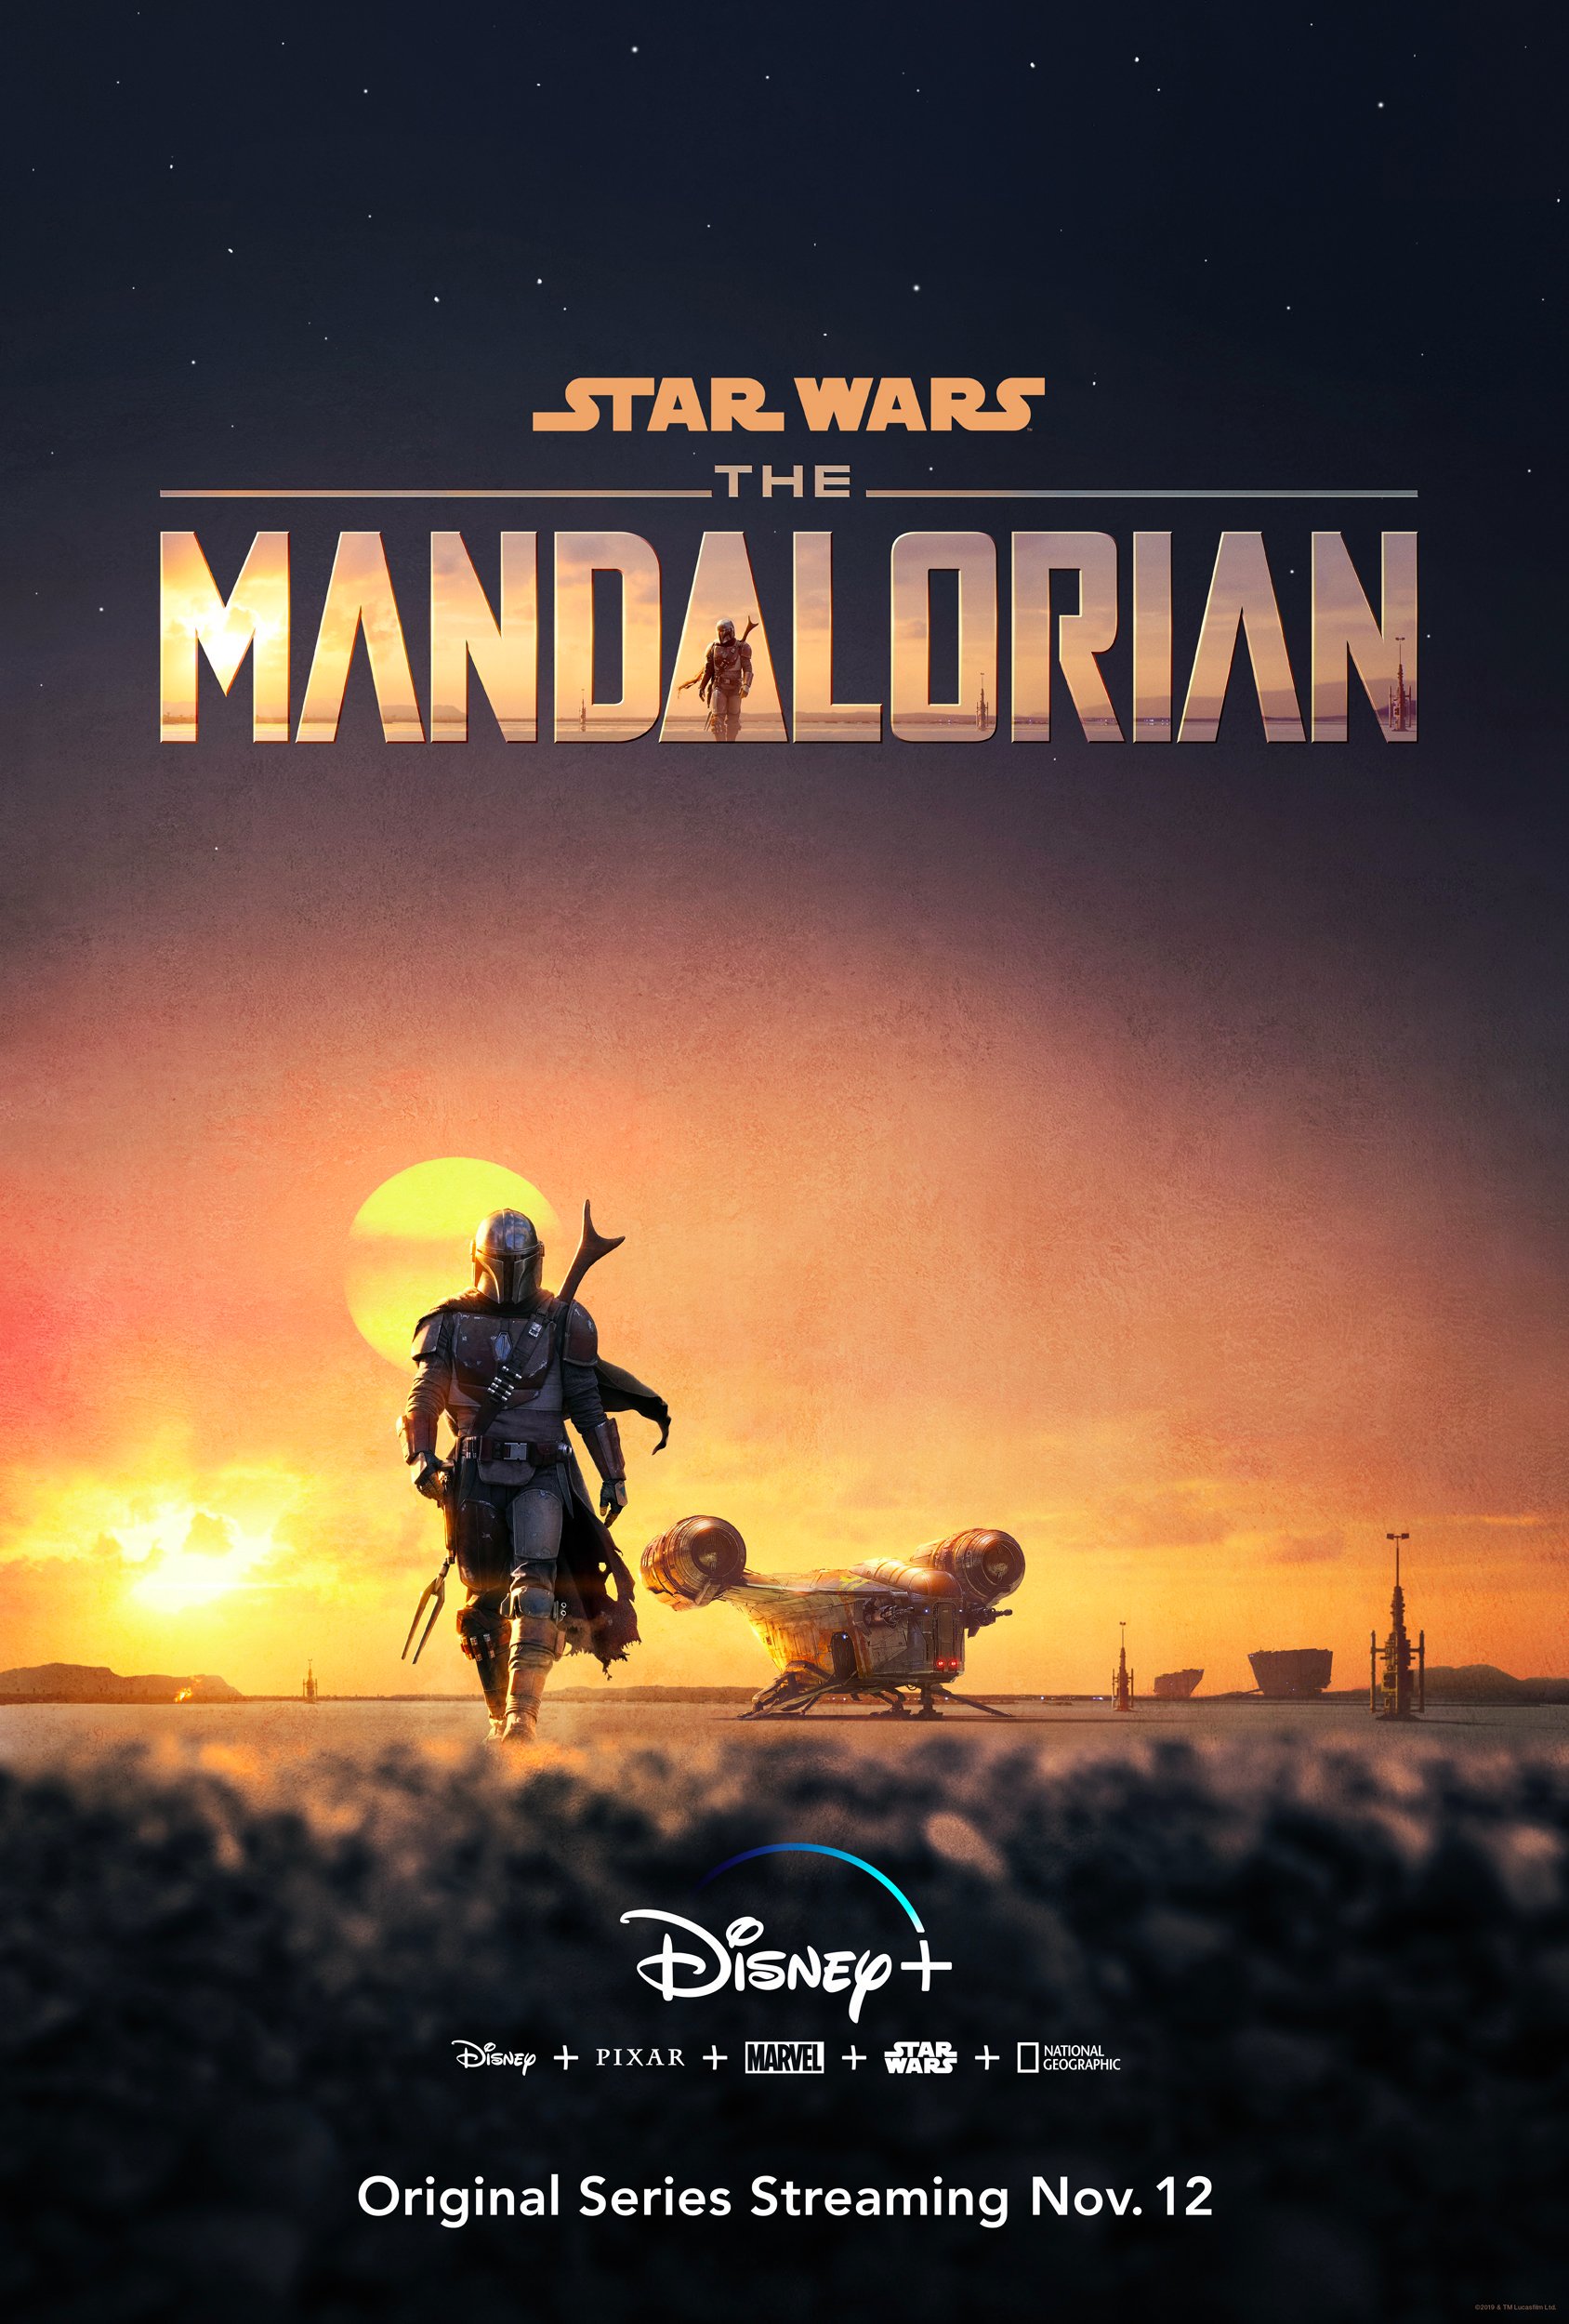 The first trailer for Star Wars’ The Mandalorian is here to blow our helmets off